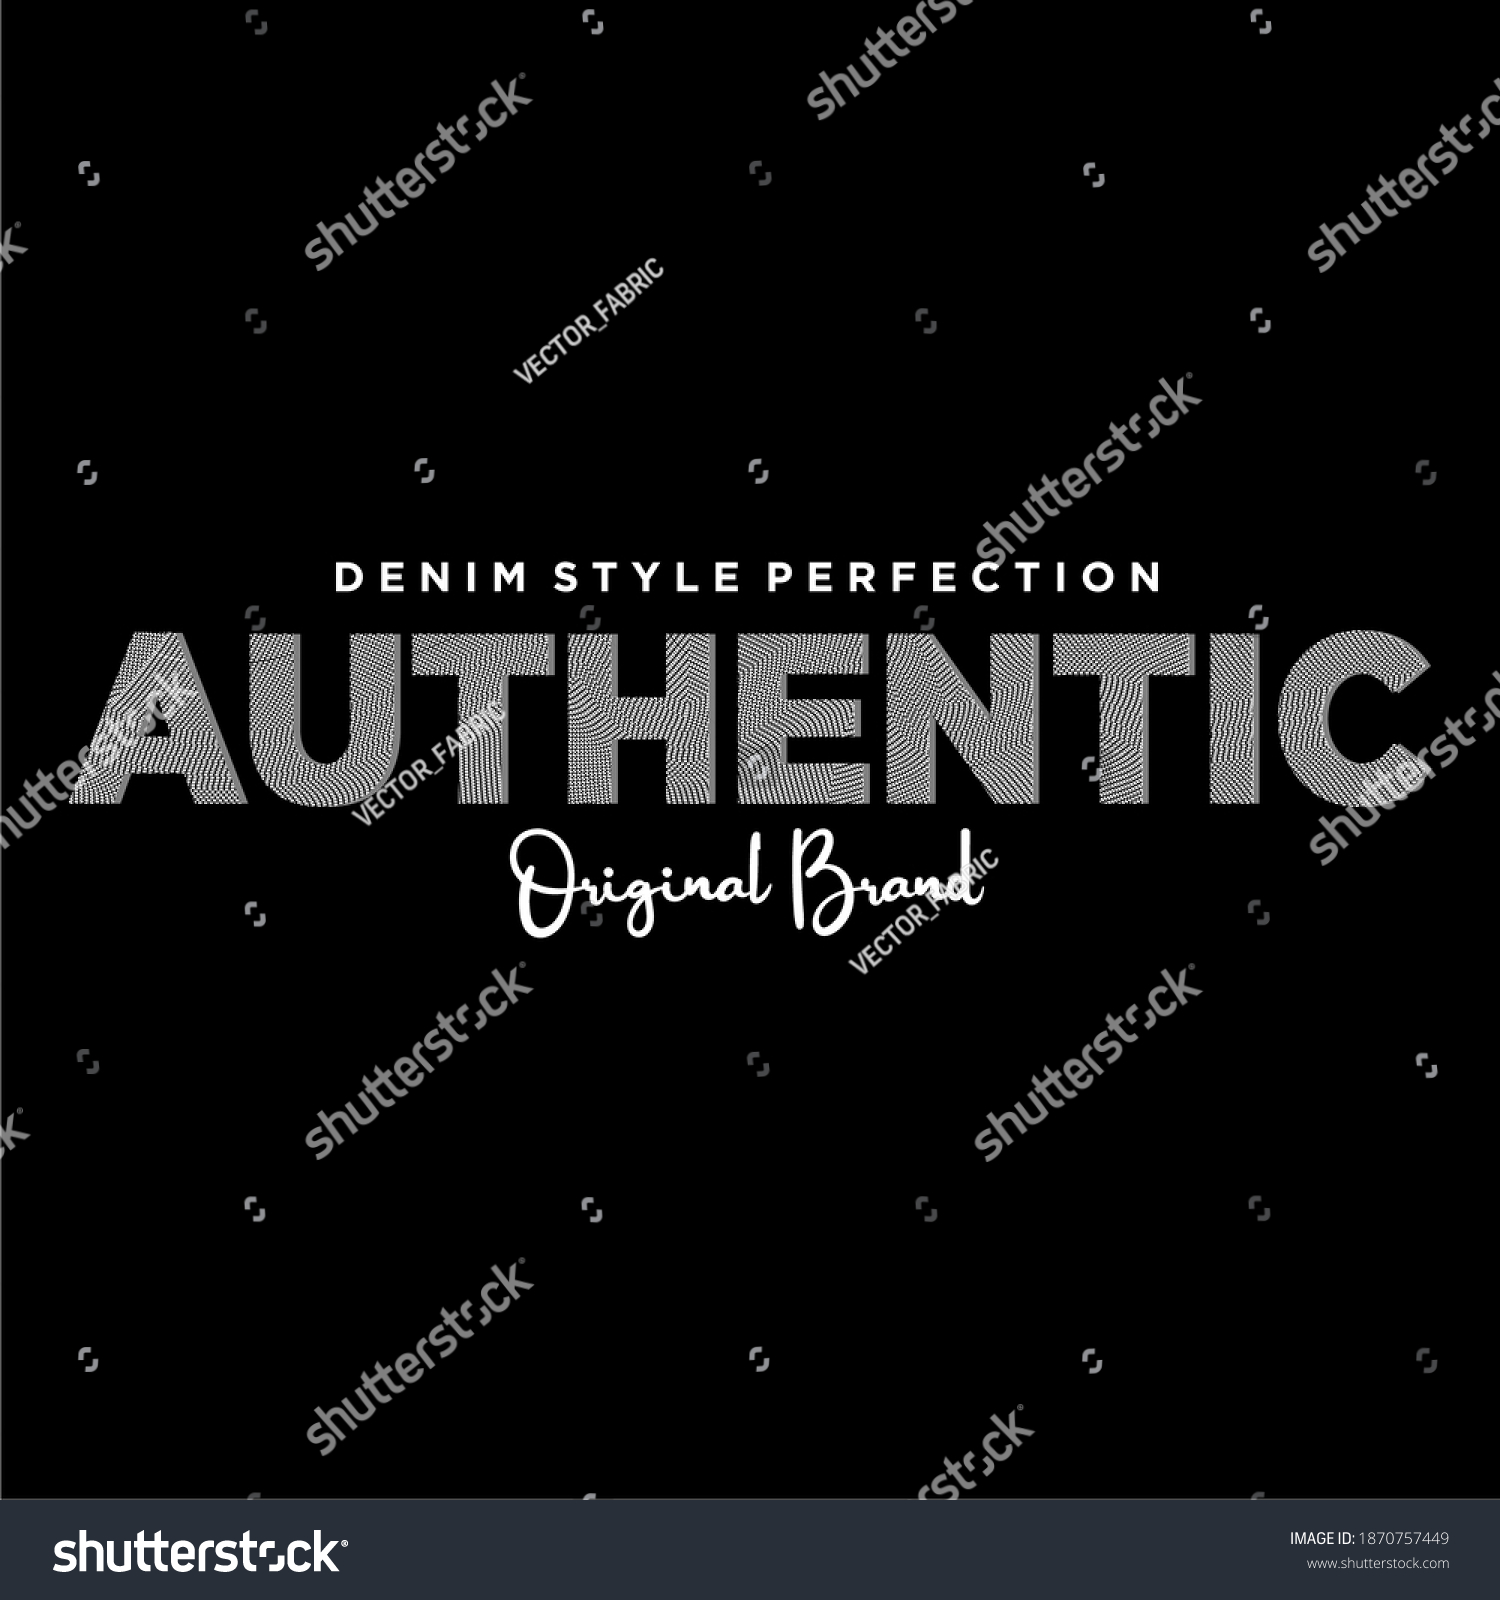 Authentic Word Design Polka Dots Background Stock Vector (Royalty Free ...